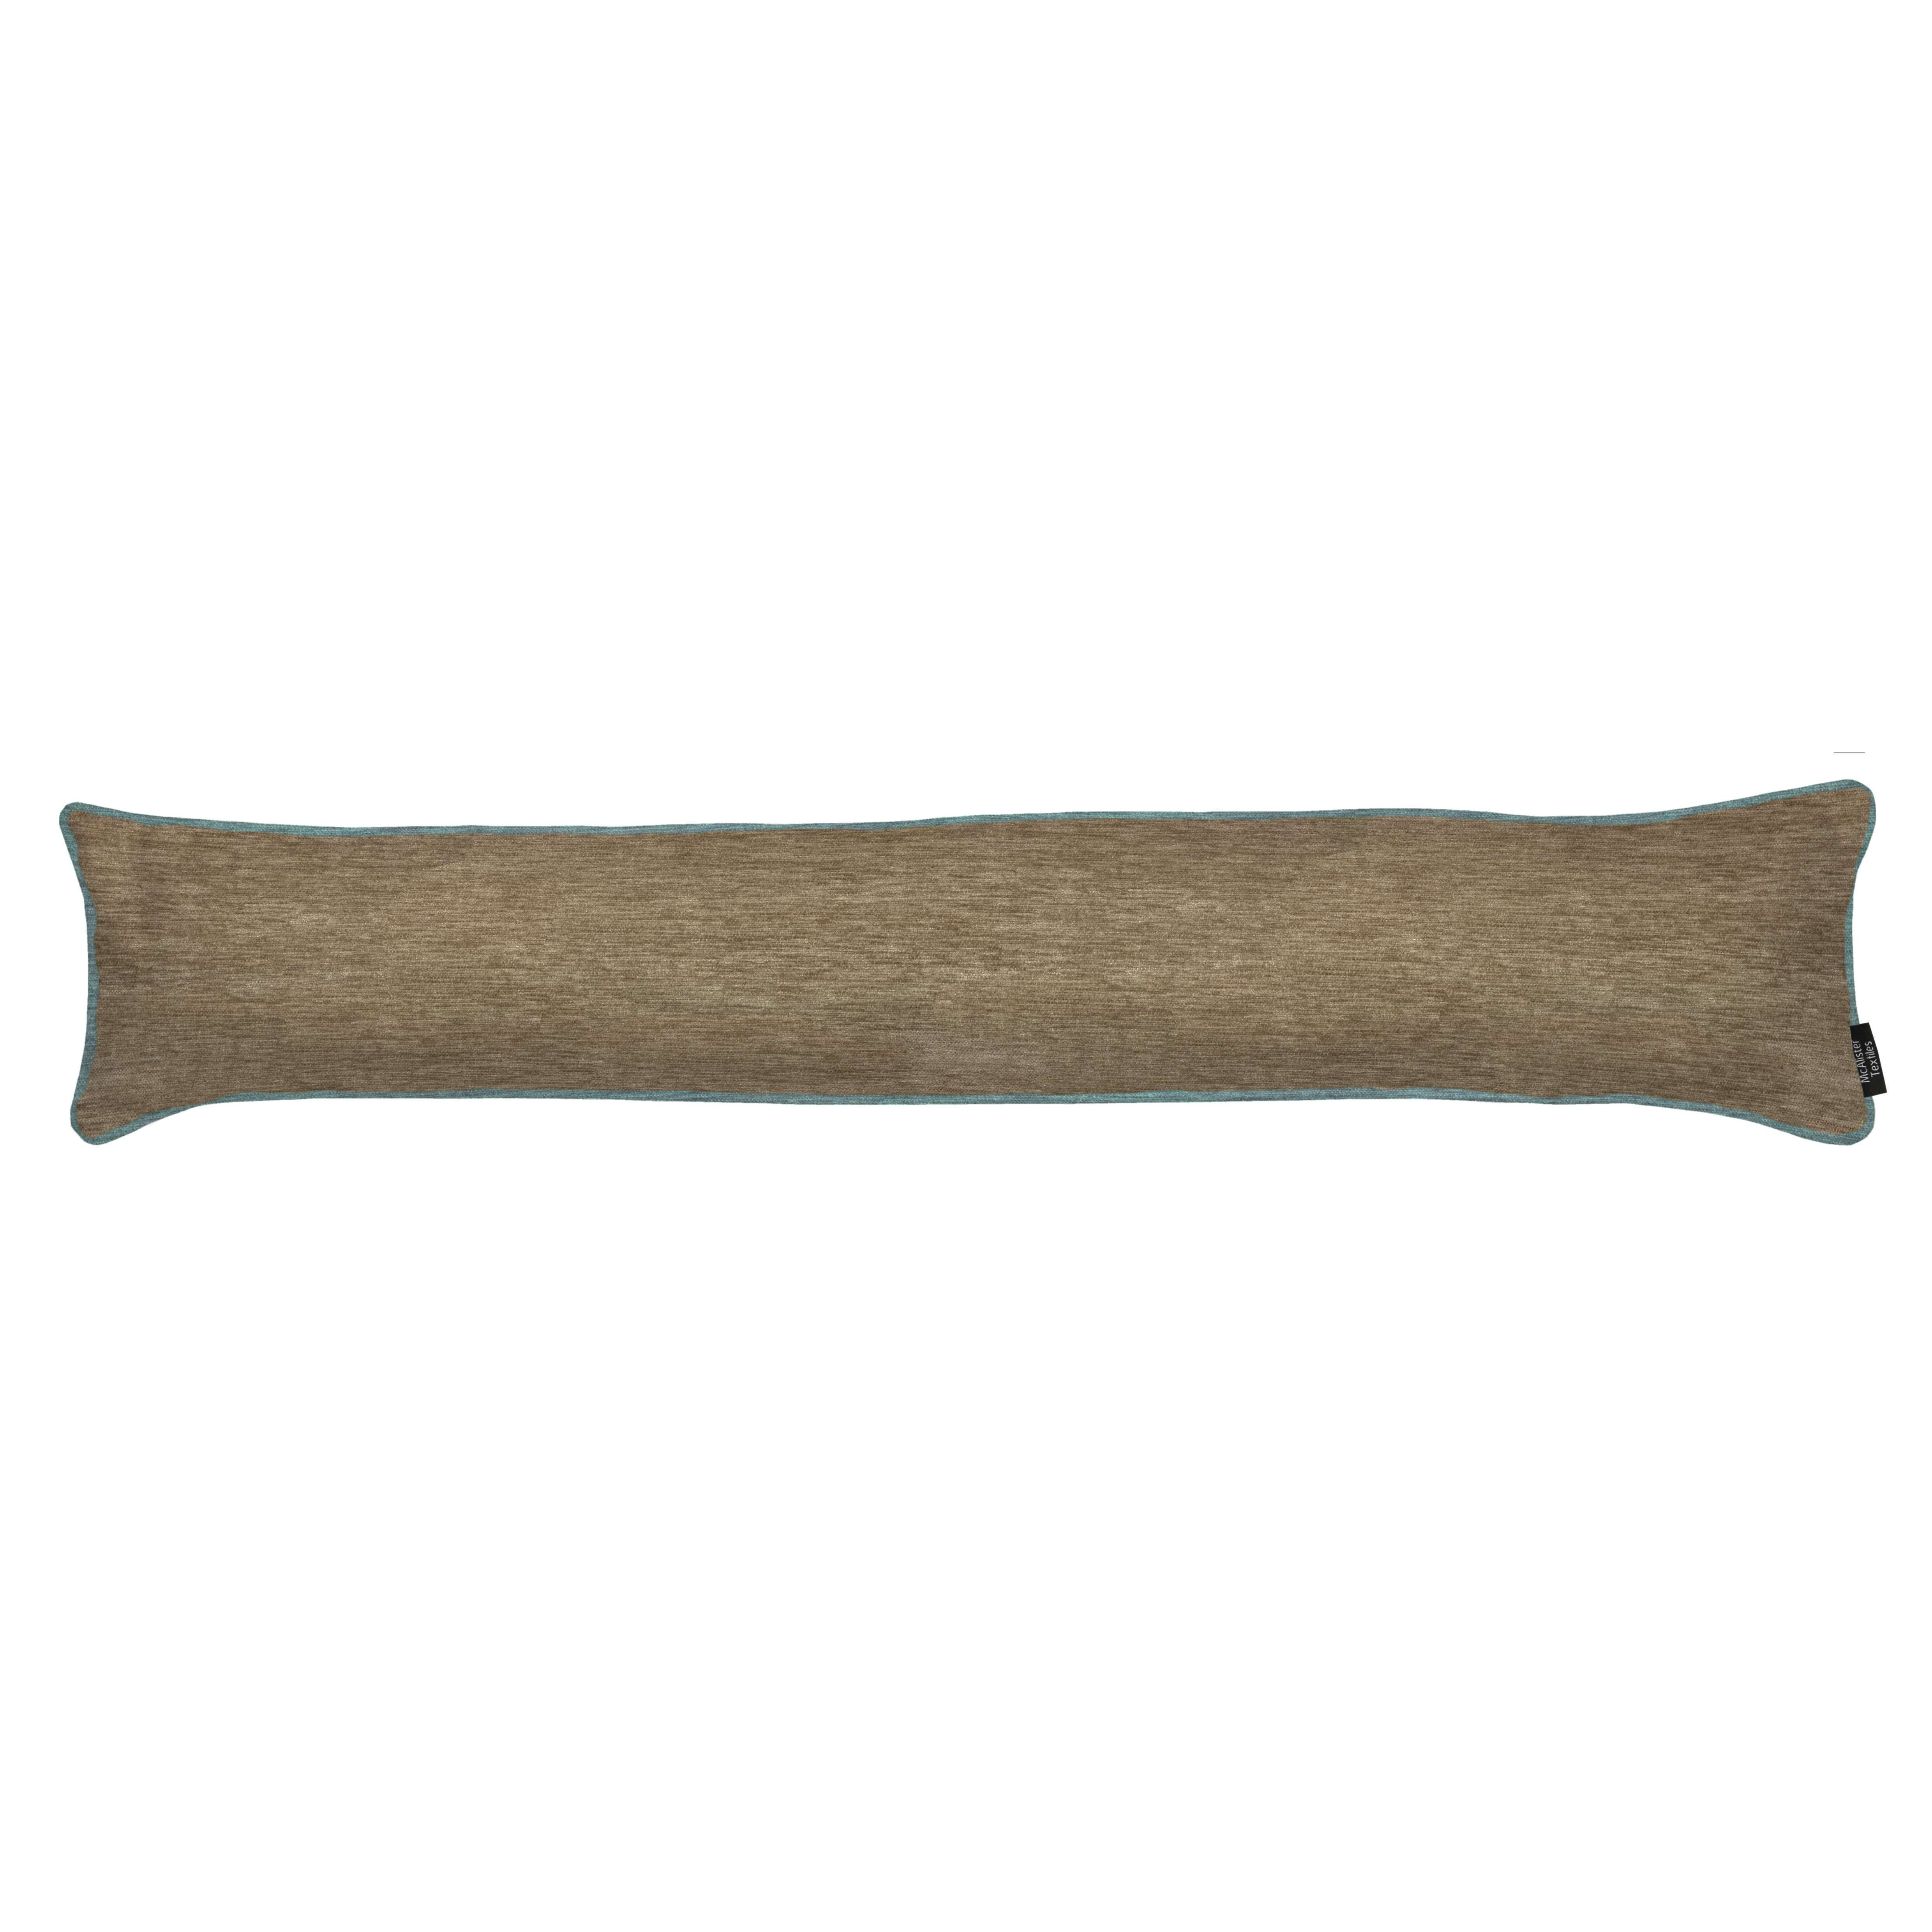 Plain Chenille Contrast Piped Beige + Blue Draught Excluder, 18cm x 90cm